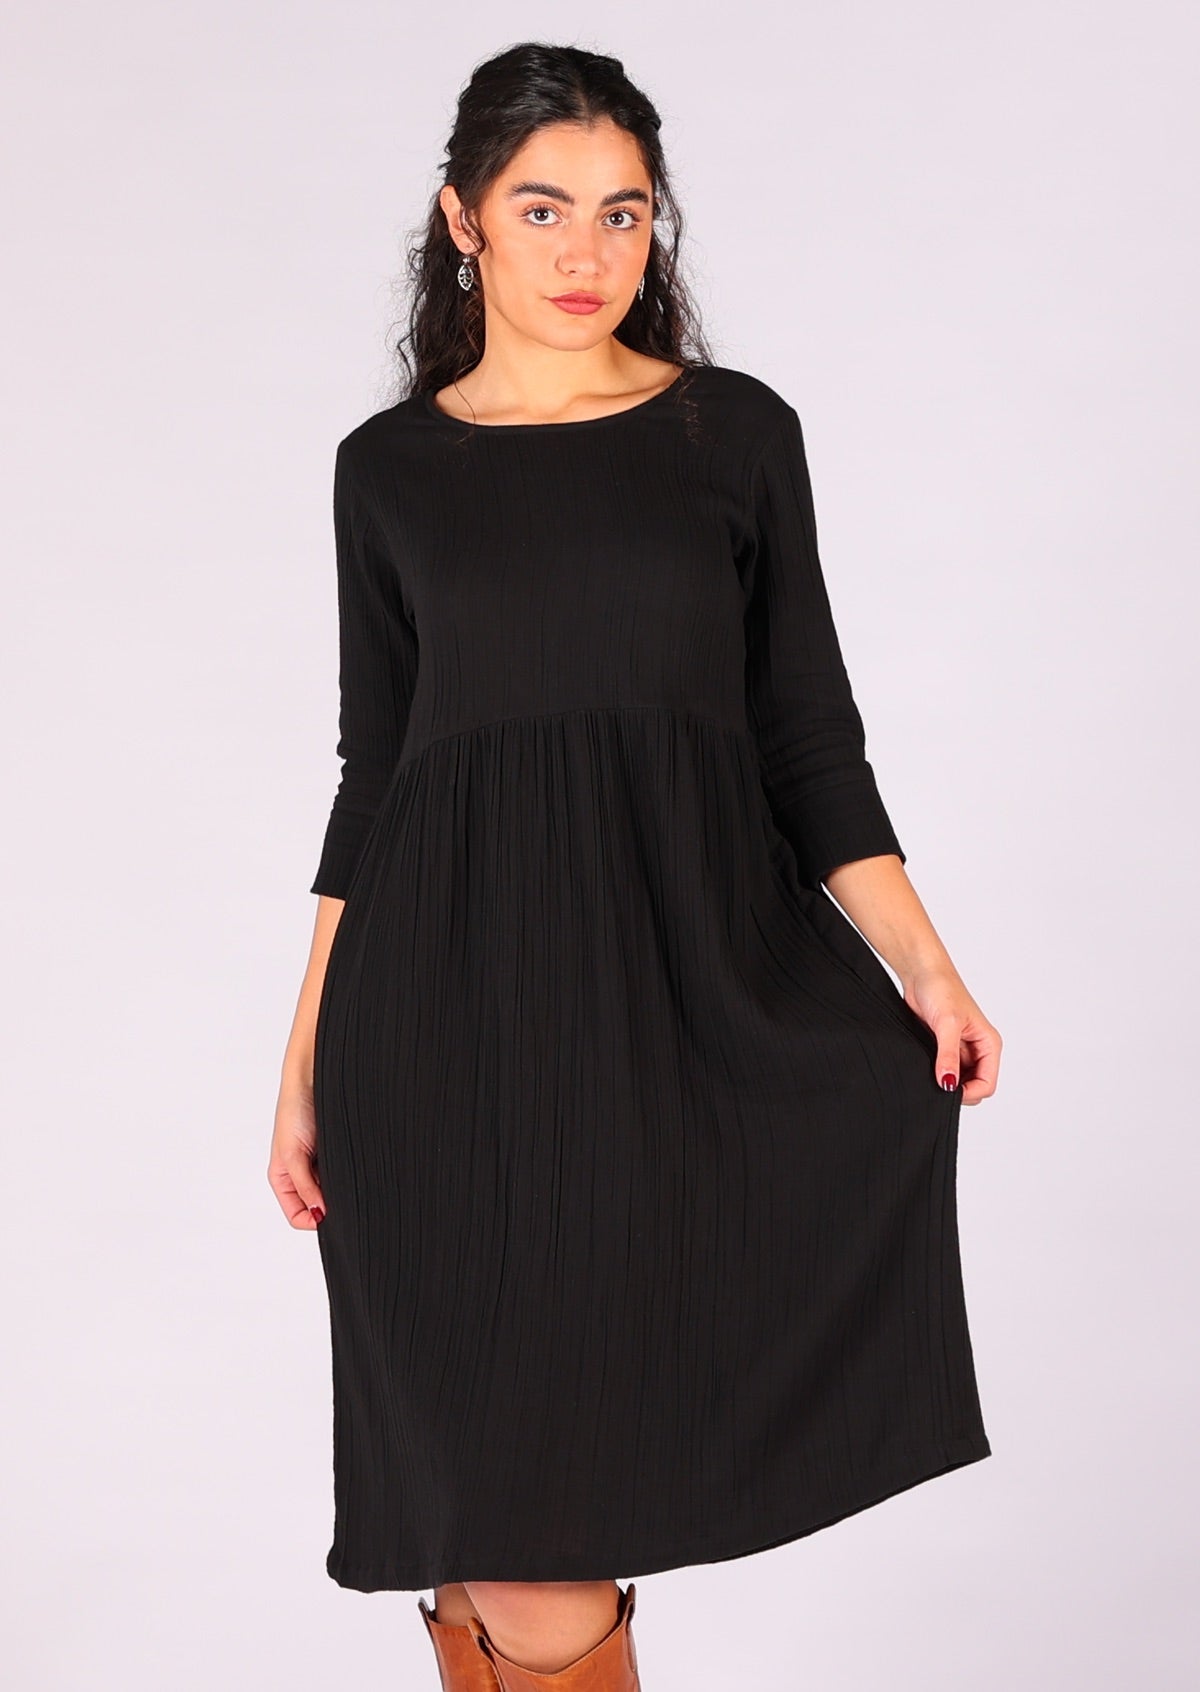 Model wears relaxed fit double cotton black dress with 3/4 sleeves